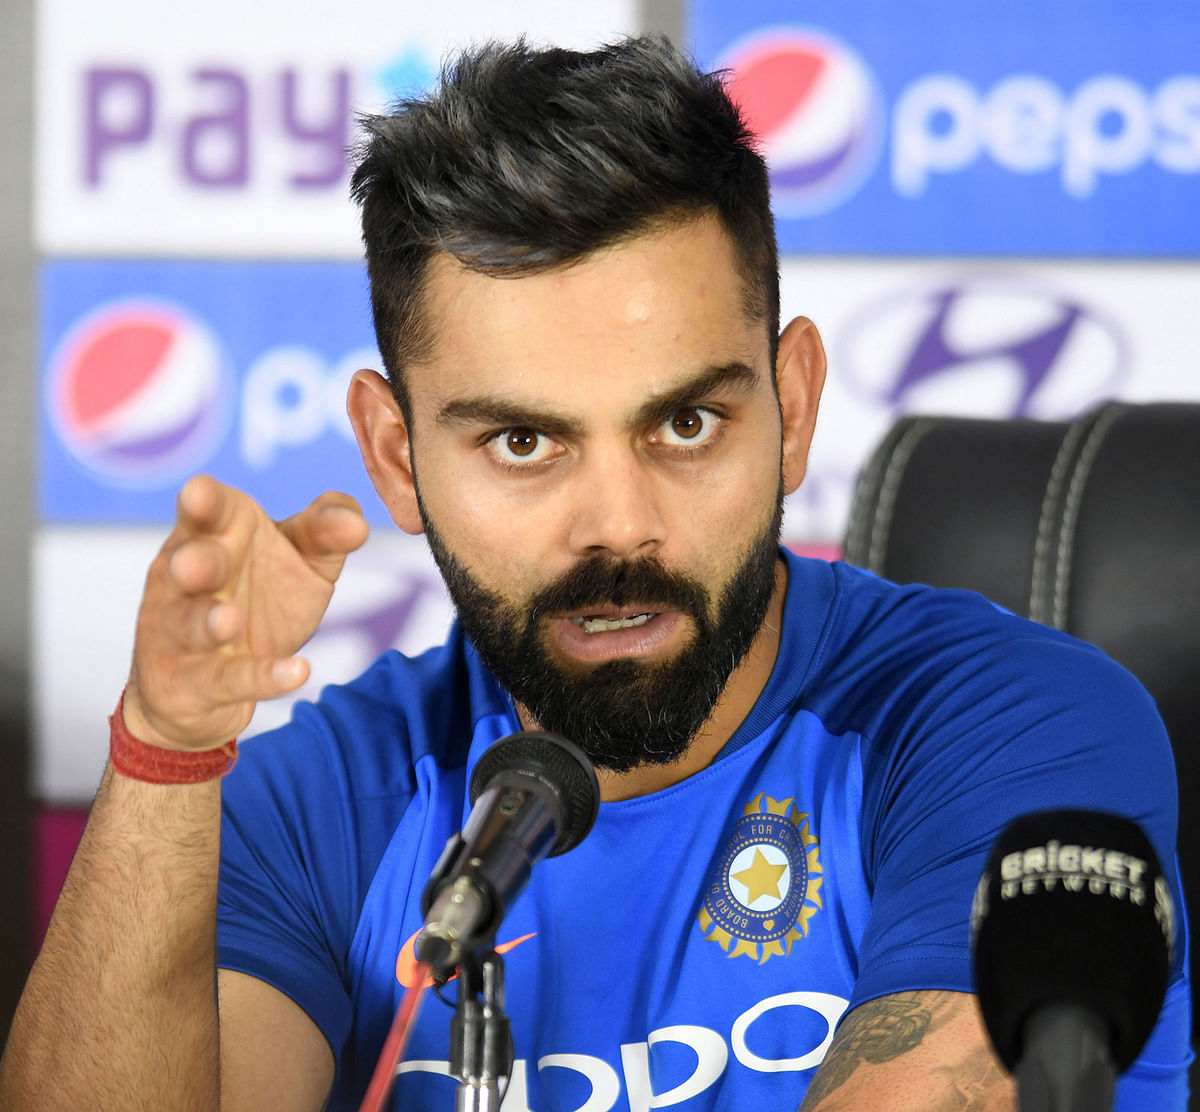 In this file photo taken on 1 March, 2019, Indian cricket team captain Virat Kohli speaks at a press conference ahead of the first one day international (ODI) cricket match between India and Australia at the Rajiv Gandhi International Cricket Stadium in Hyderabad. Virat Kohli is not panicking about the World Cup despite India being ravaged in the media for their first one-day series defeat at home since 2015 at the hands of a resurgent Australia. -- Photo: AFP